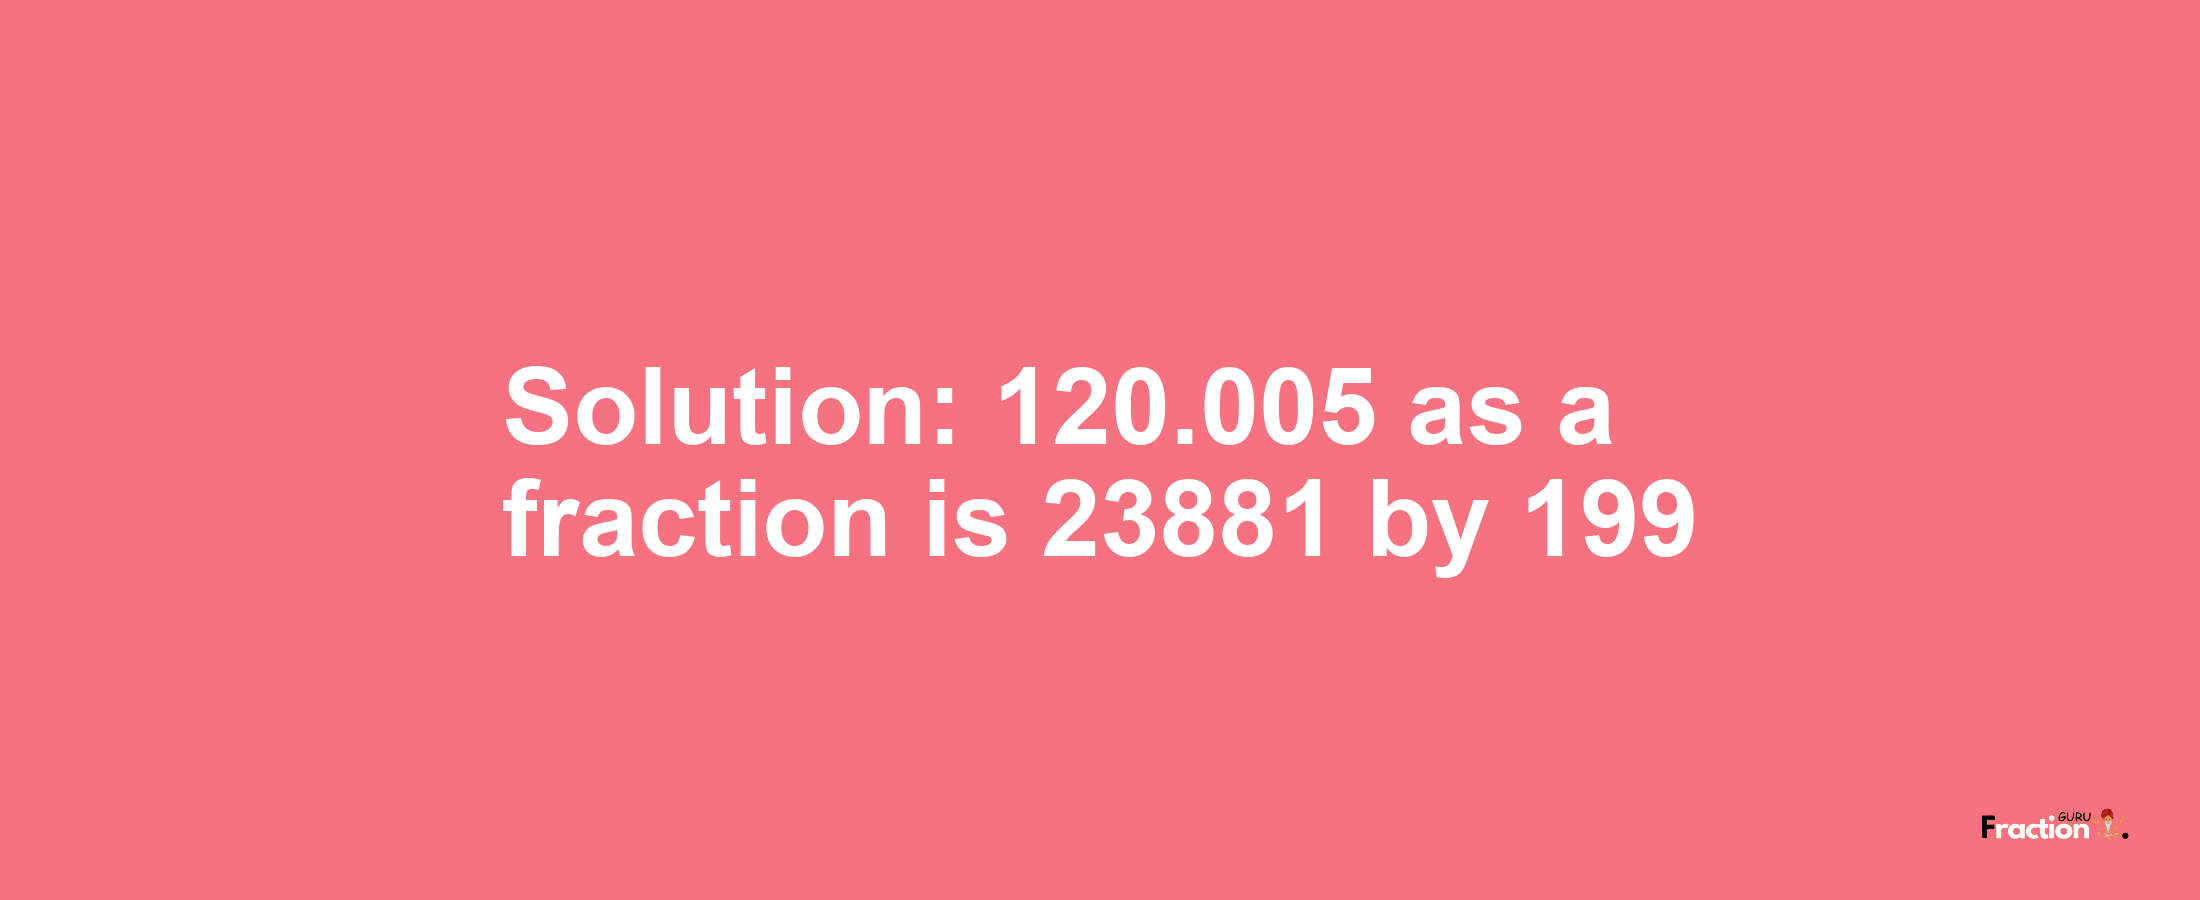 Solution:120.005 as a fraction is 23881/199